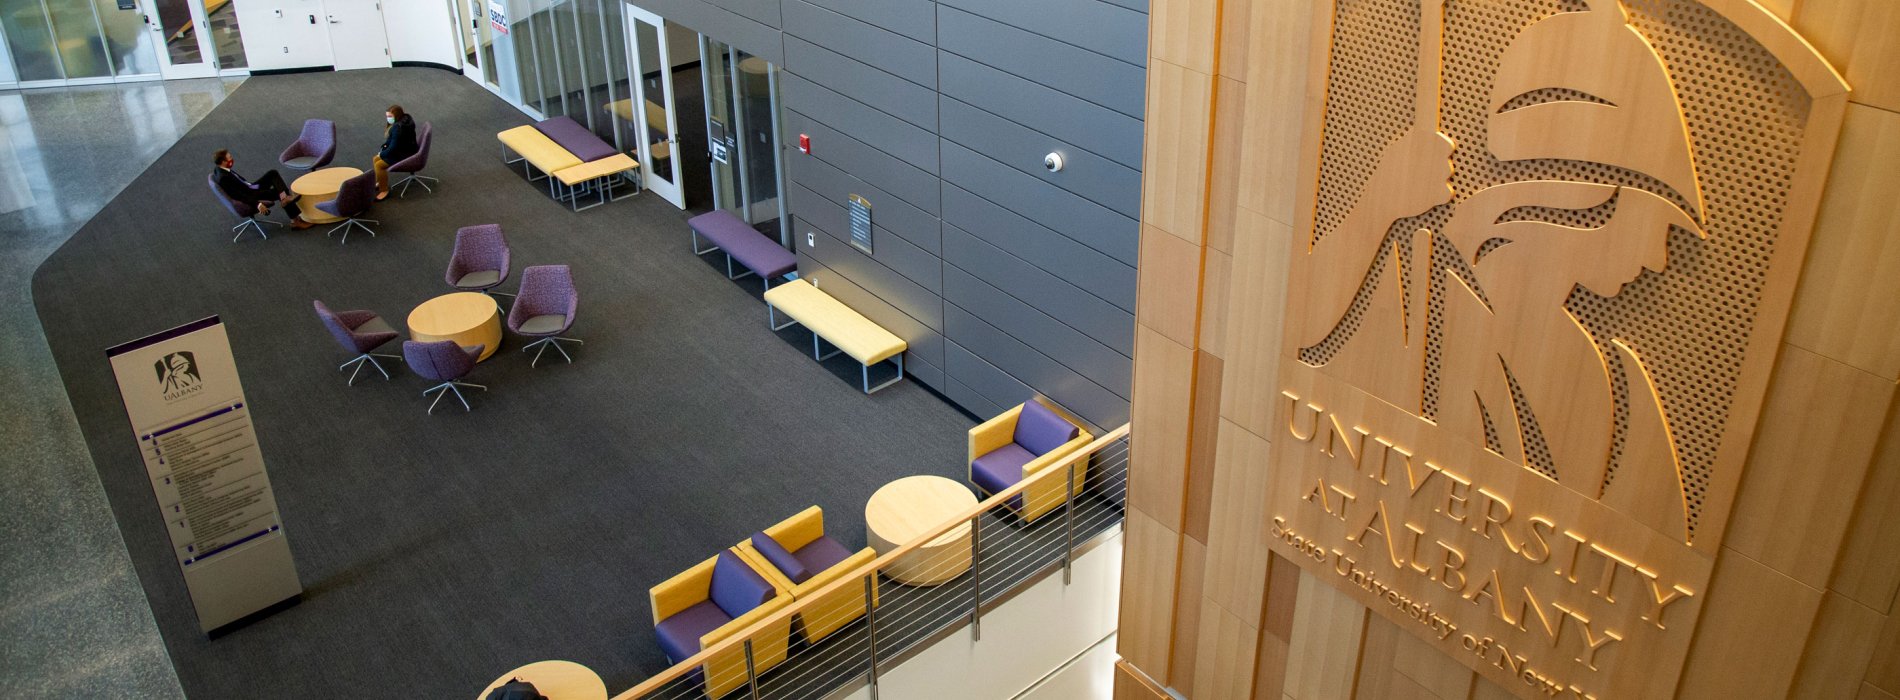 Two people sit in purple chairs inside the ETEC lobby, which has a large carved wood sign that says University at Albany, State University of New York.